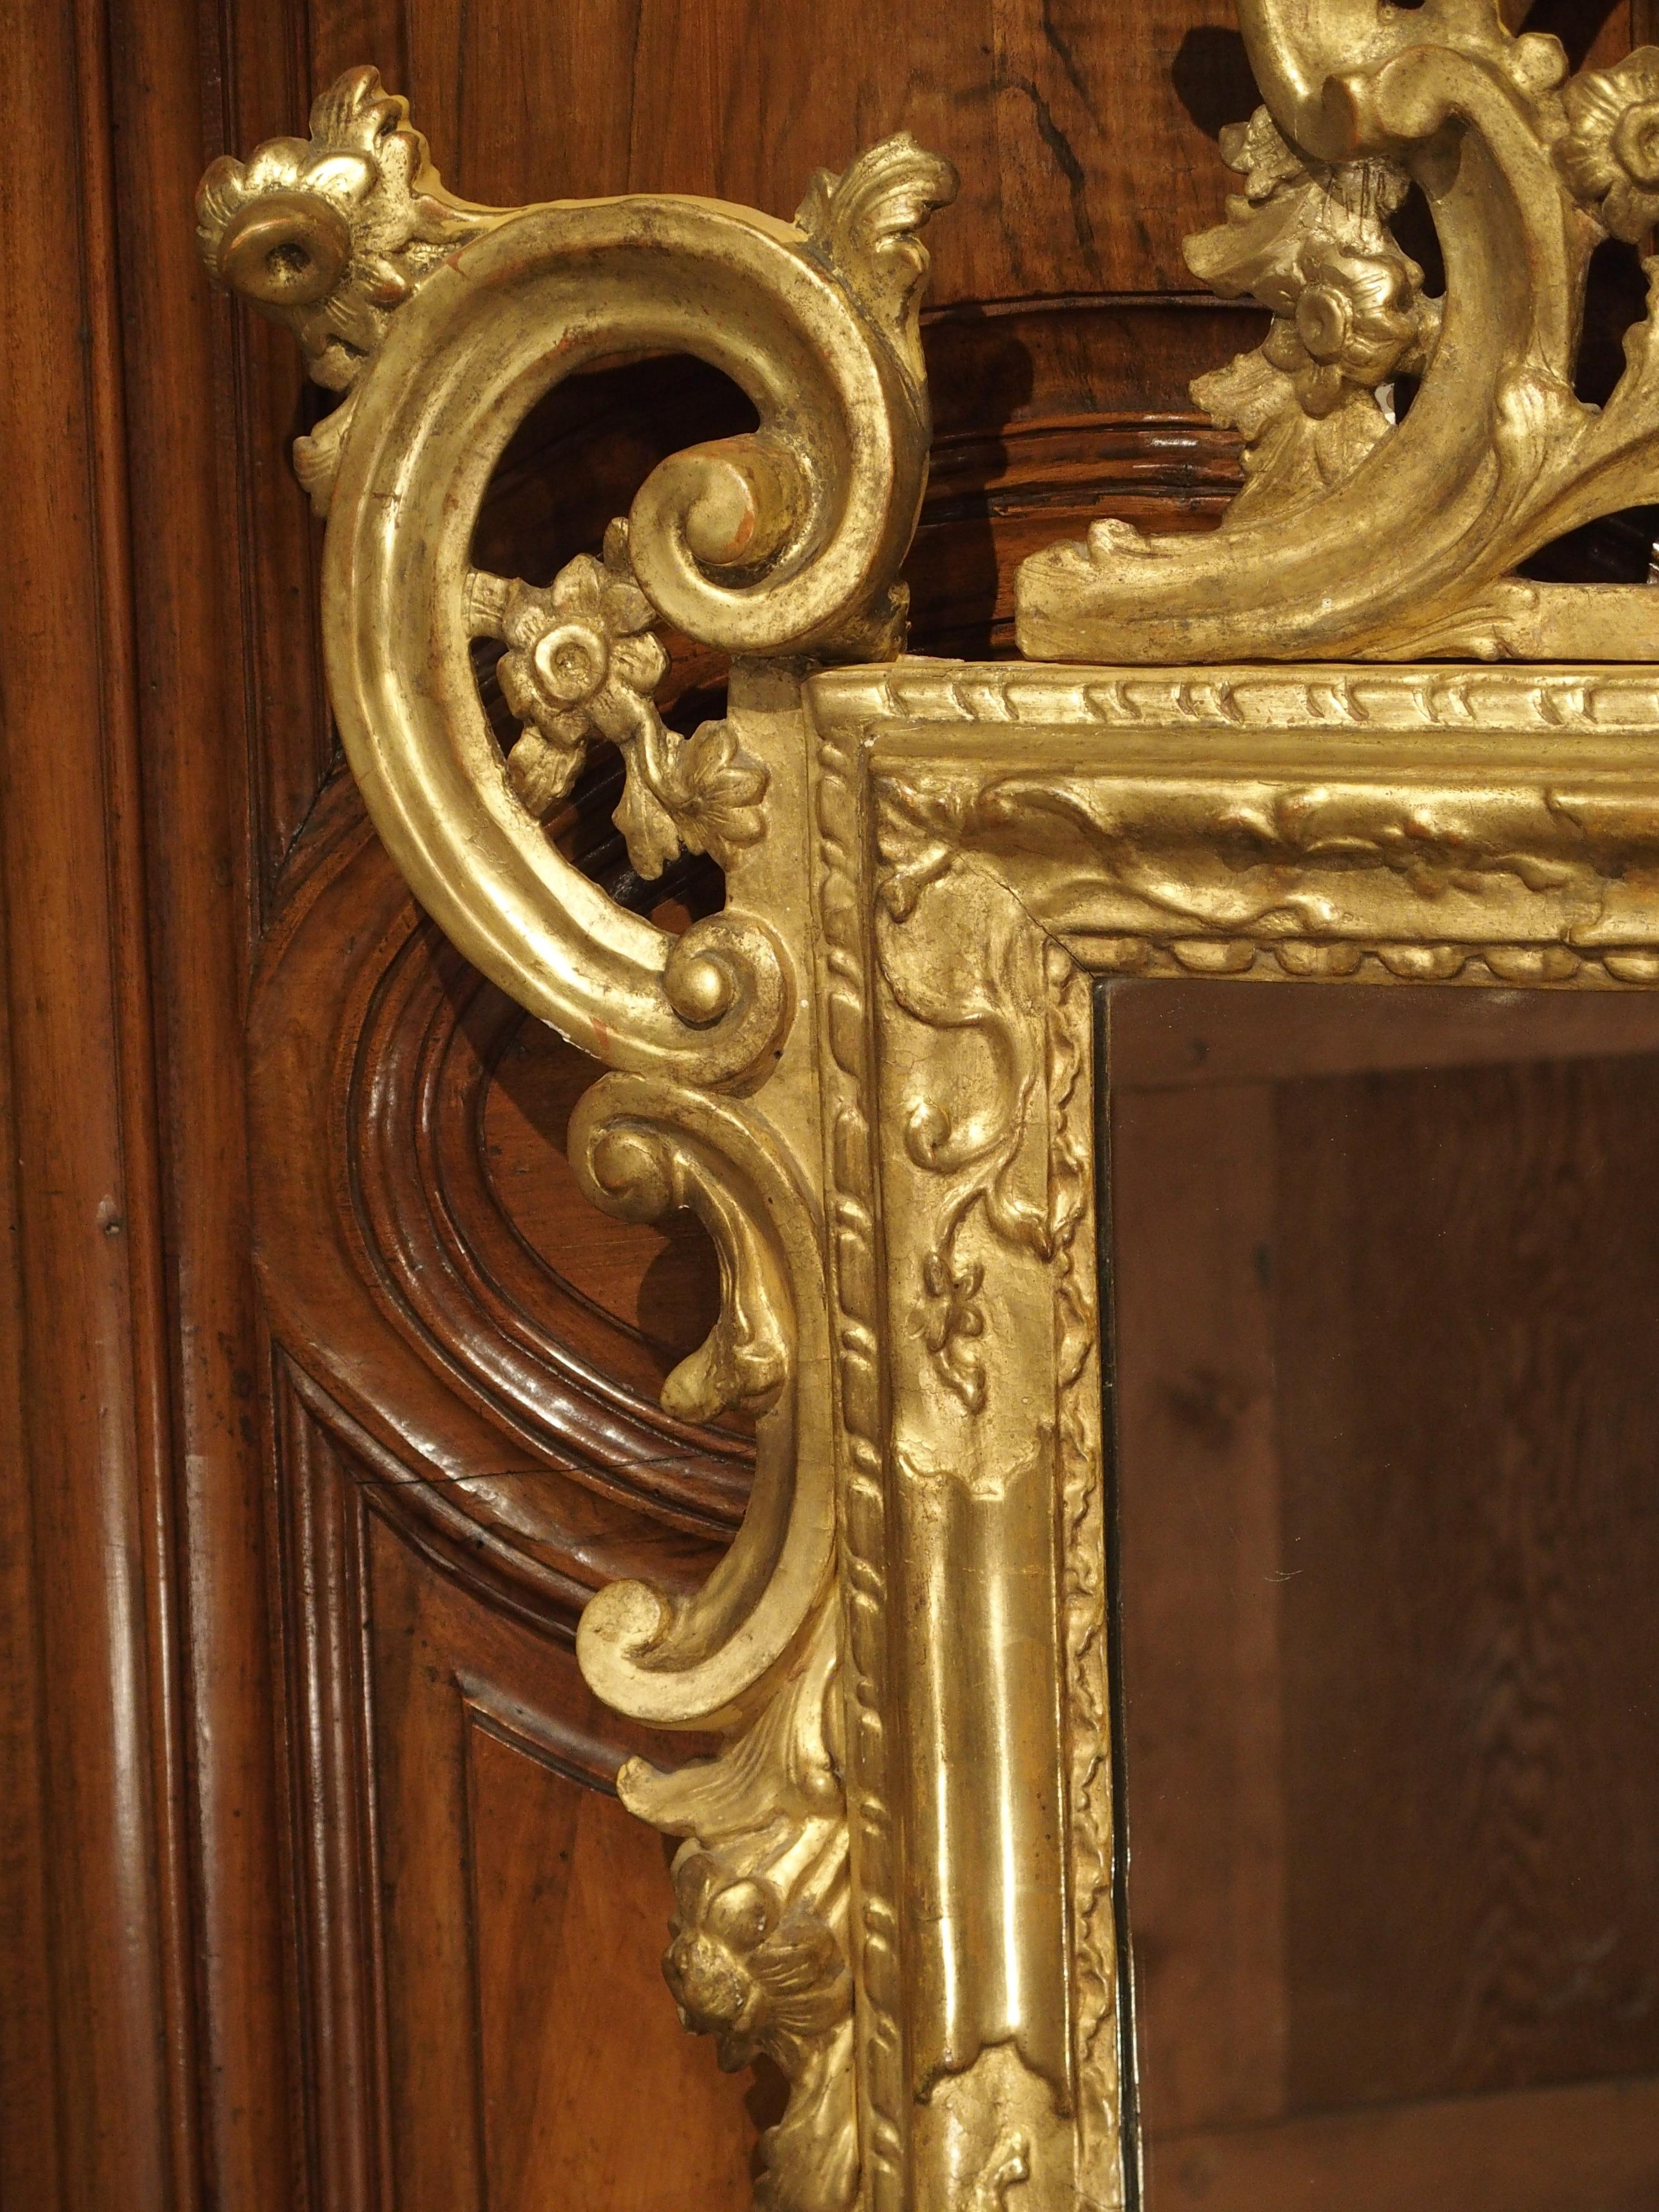 Hand-Carved Richly Carved Antique Venetian Giltwood Mirror, Circa 1850